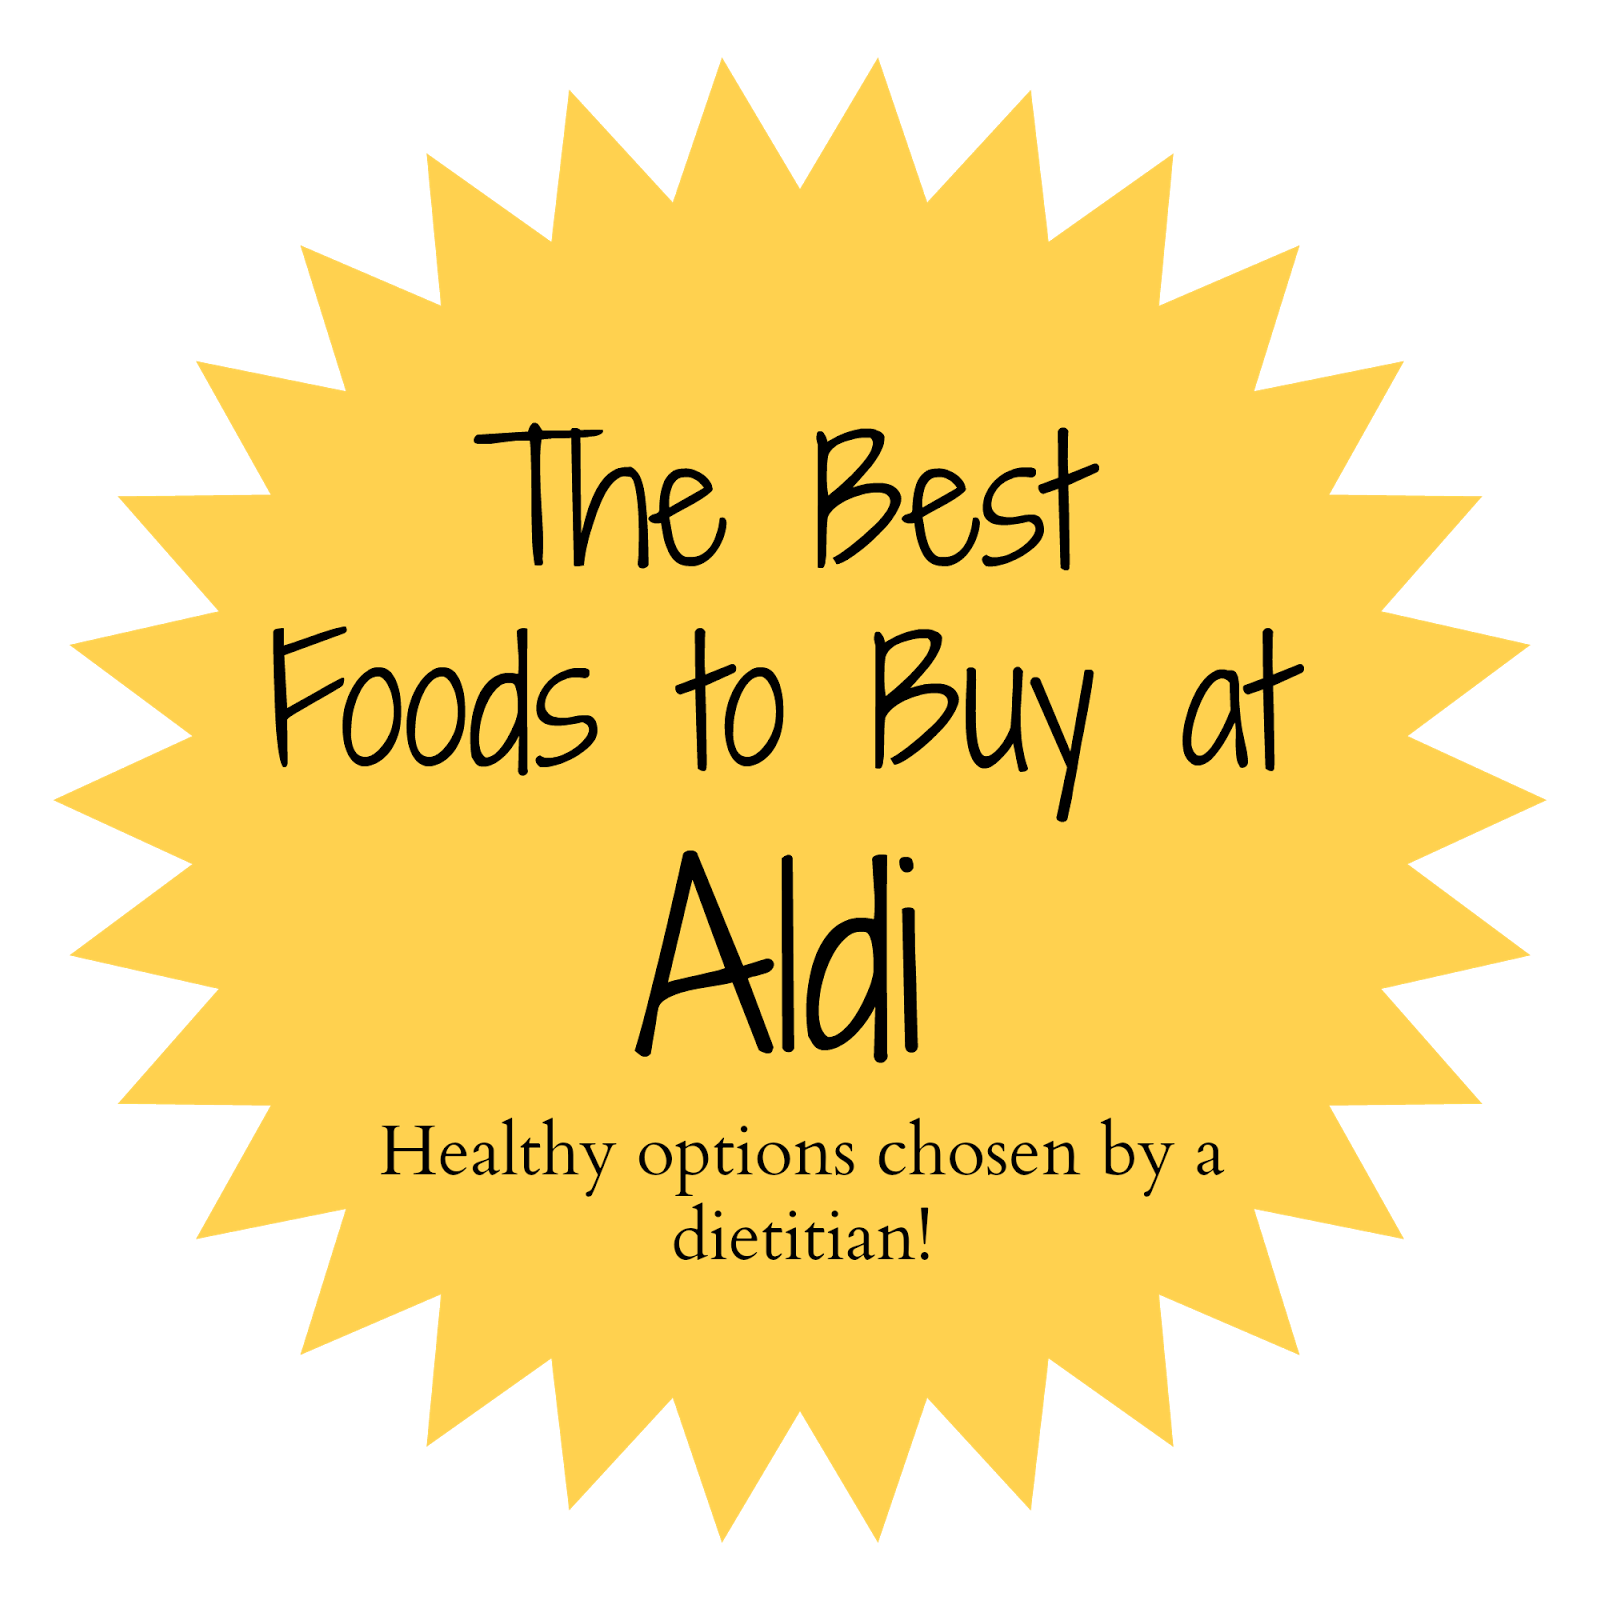 The Best Foods to Buy at Aldi- healthy options chosen by a registered dietitian